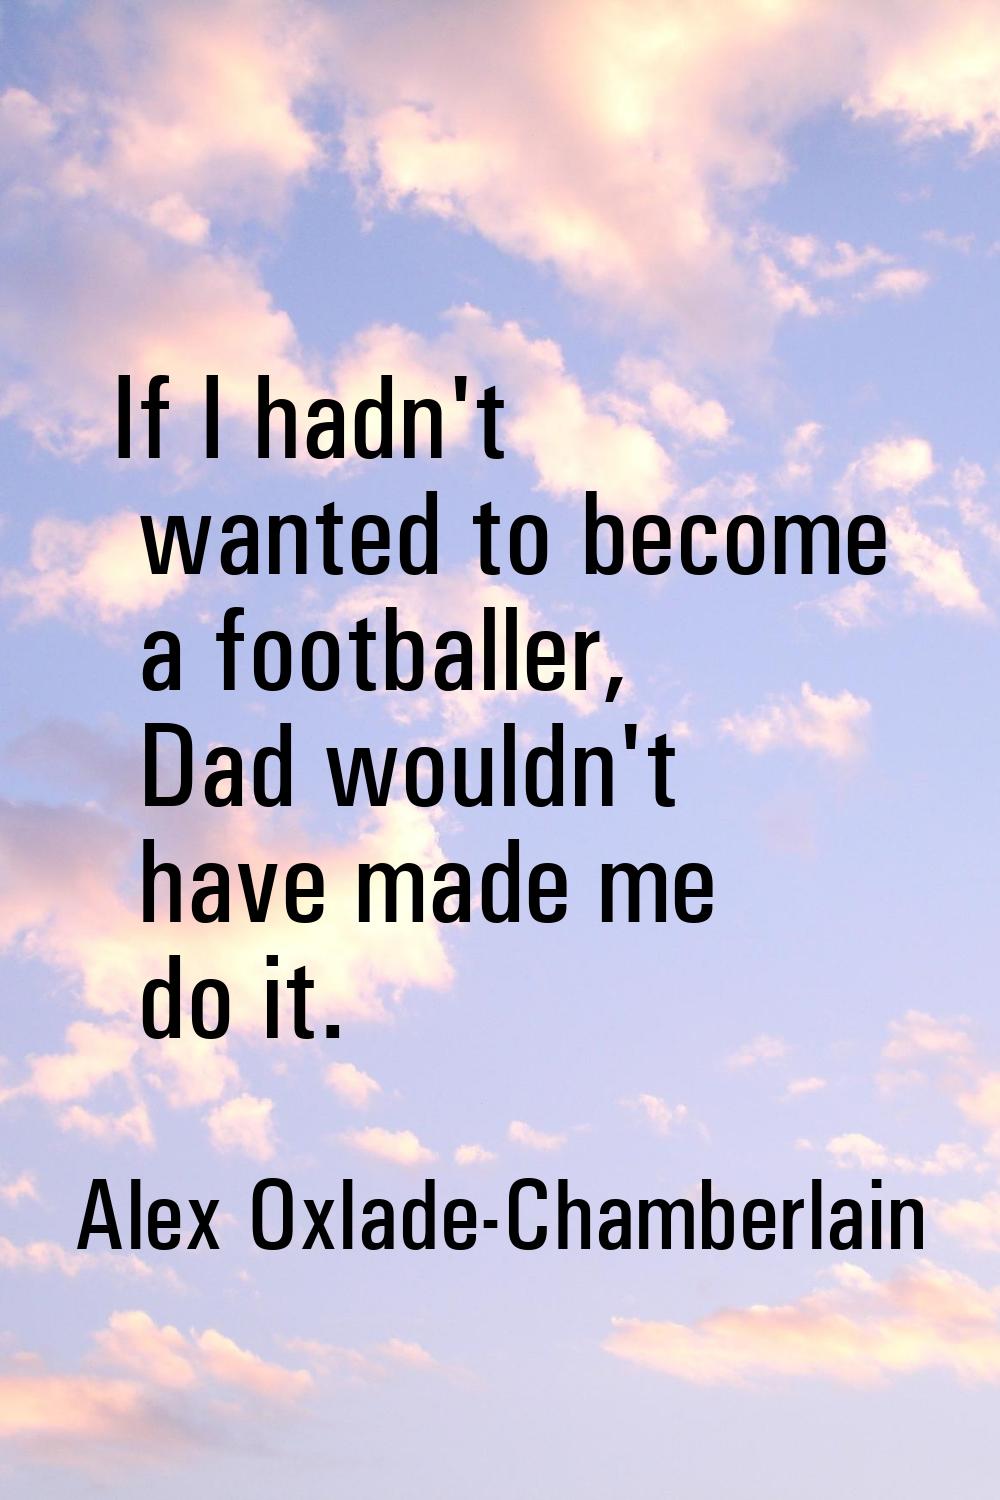 If I hadn't wanted to become a footballer, Dad wouldn't have made me do it.